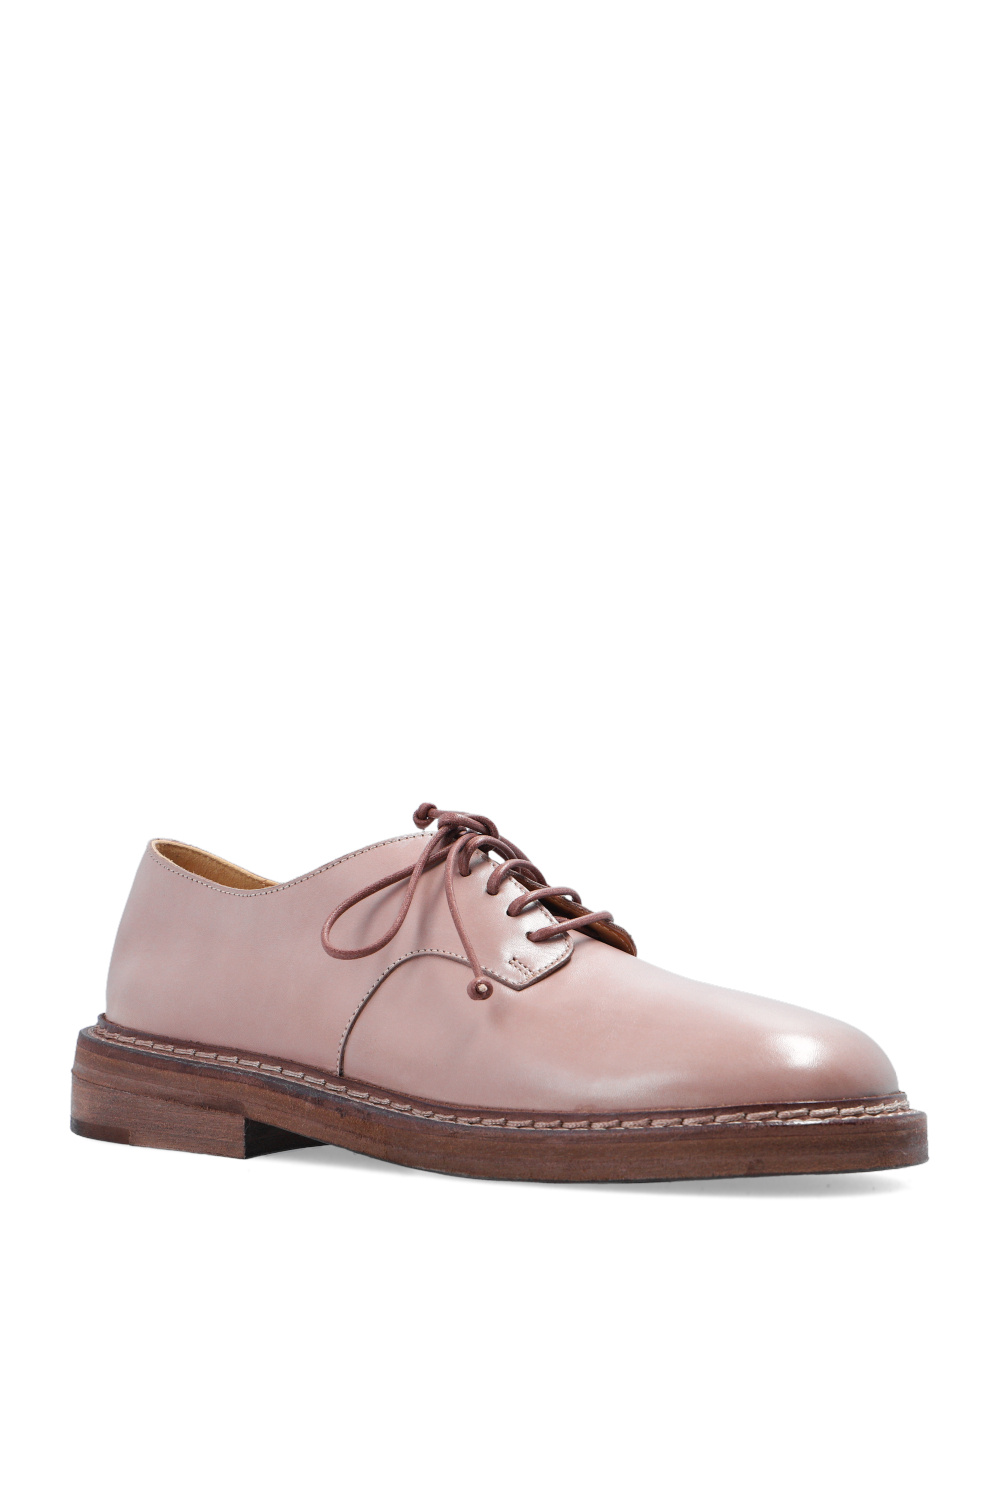 Marsell Derby shoes | Women's Shoes | Vitkac